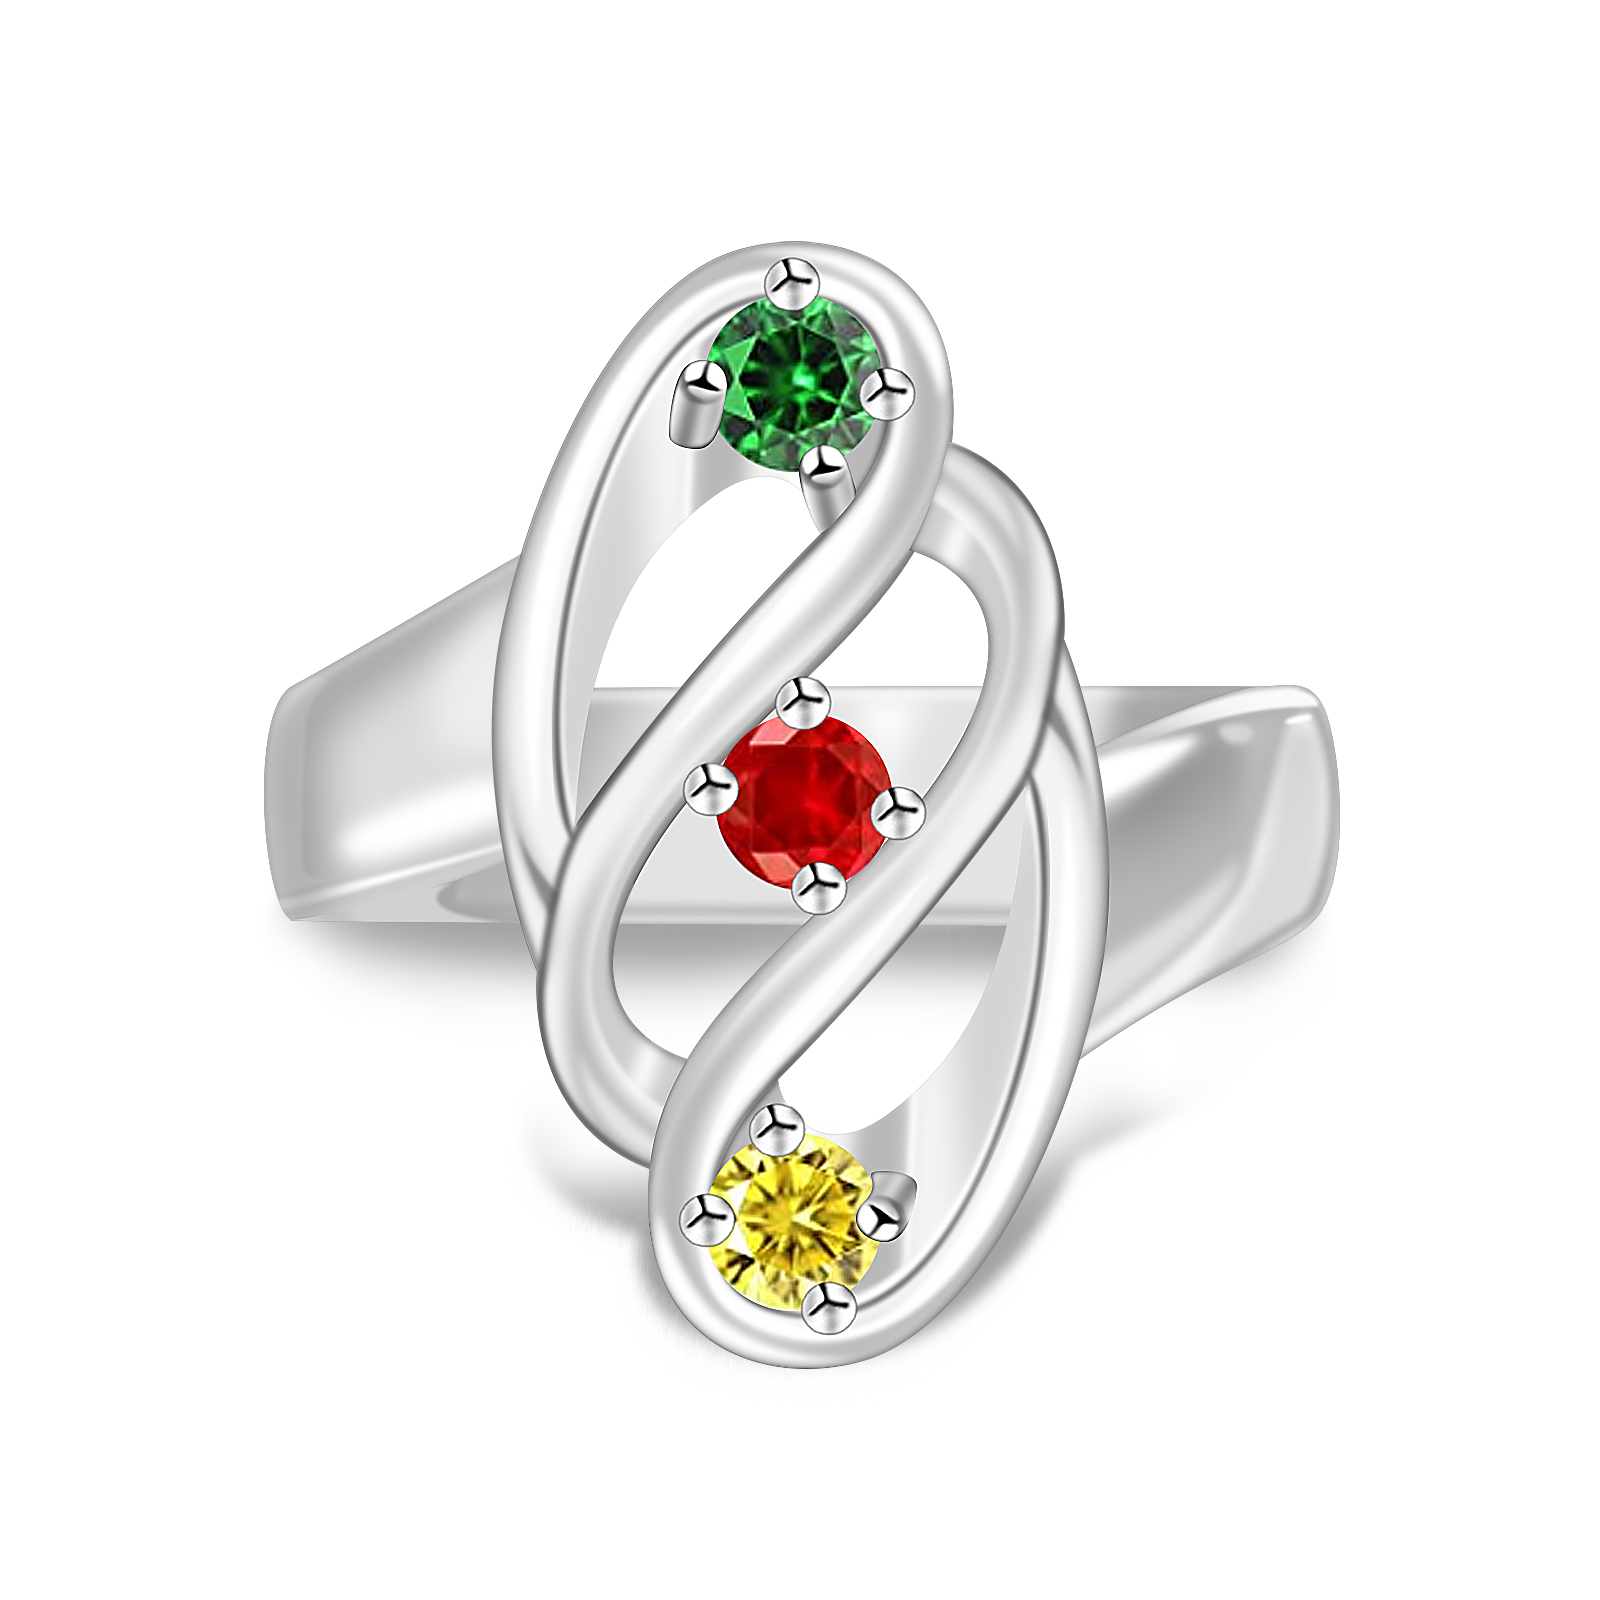 Personalized Simulated Birthstones Ring Series for Women-YITUB